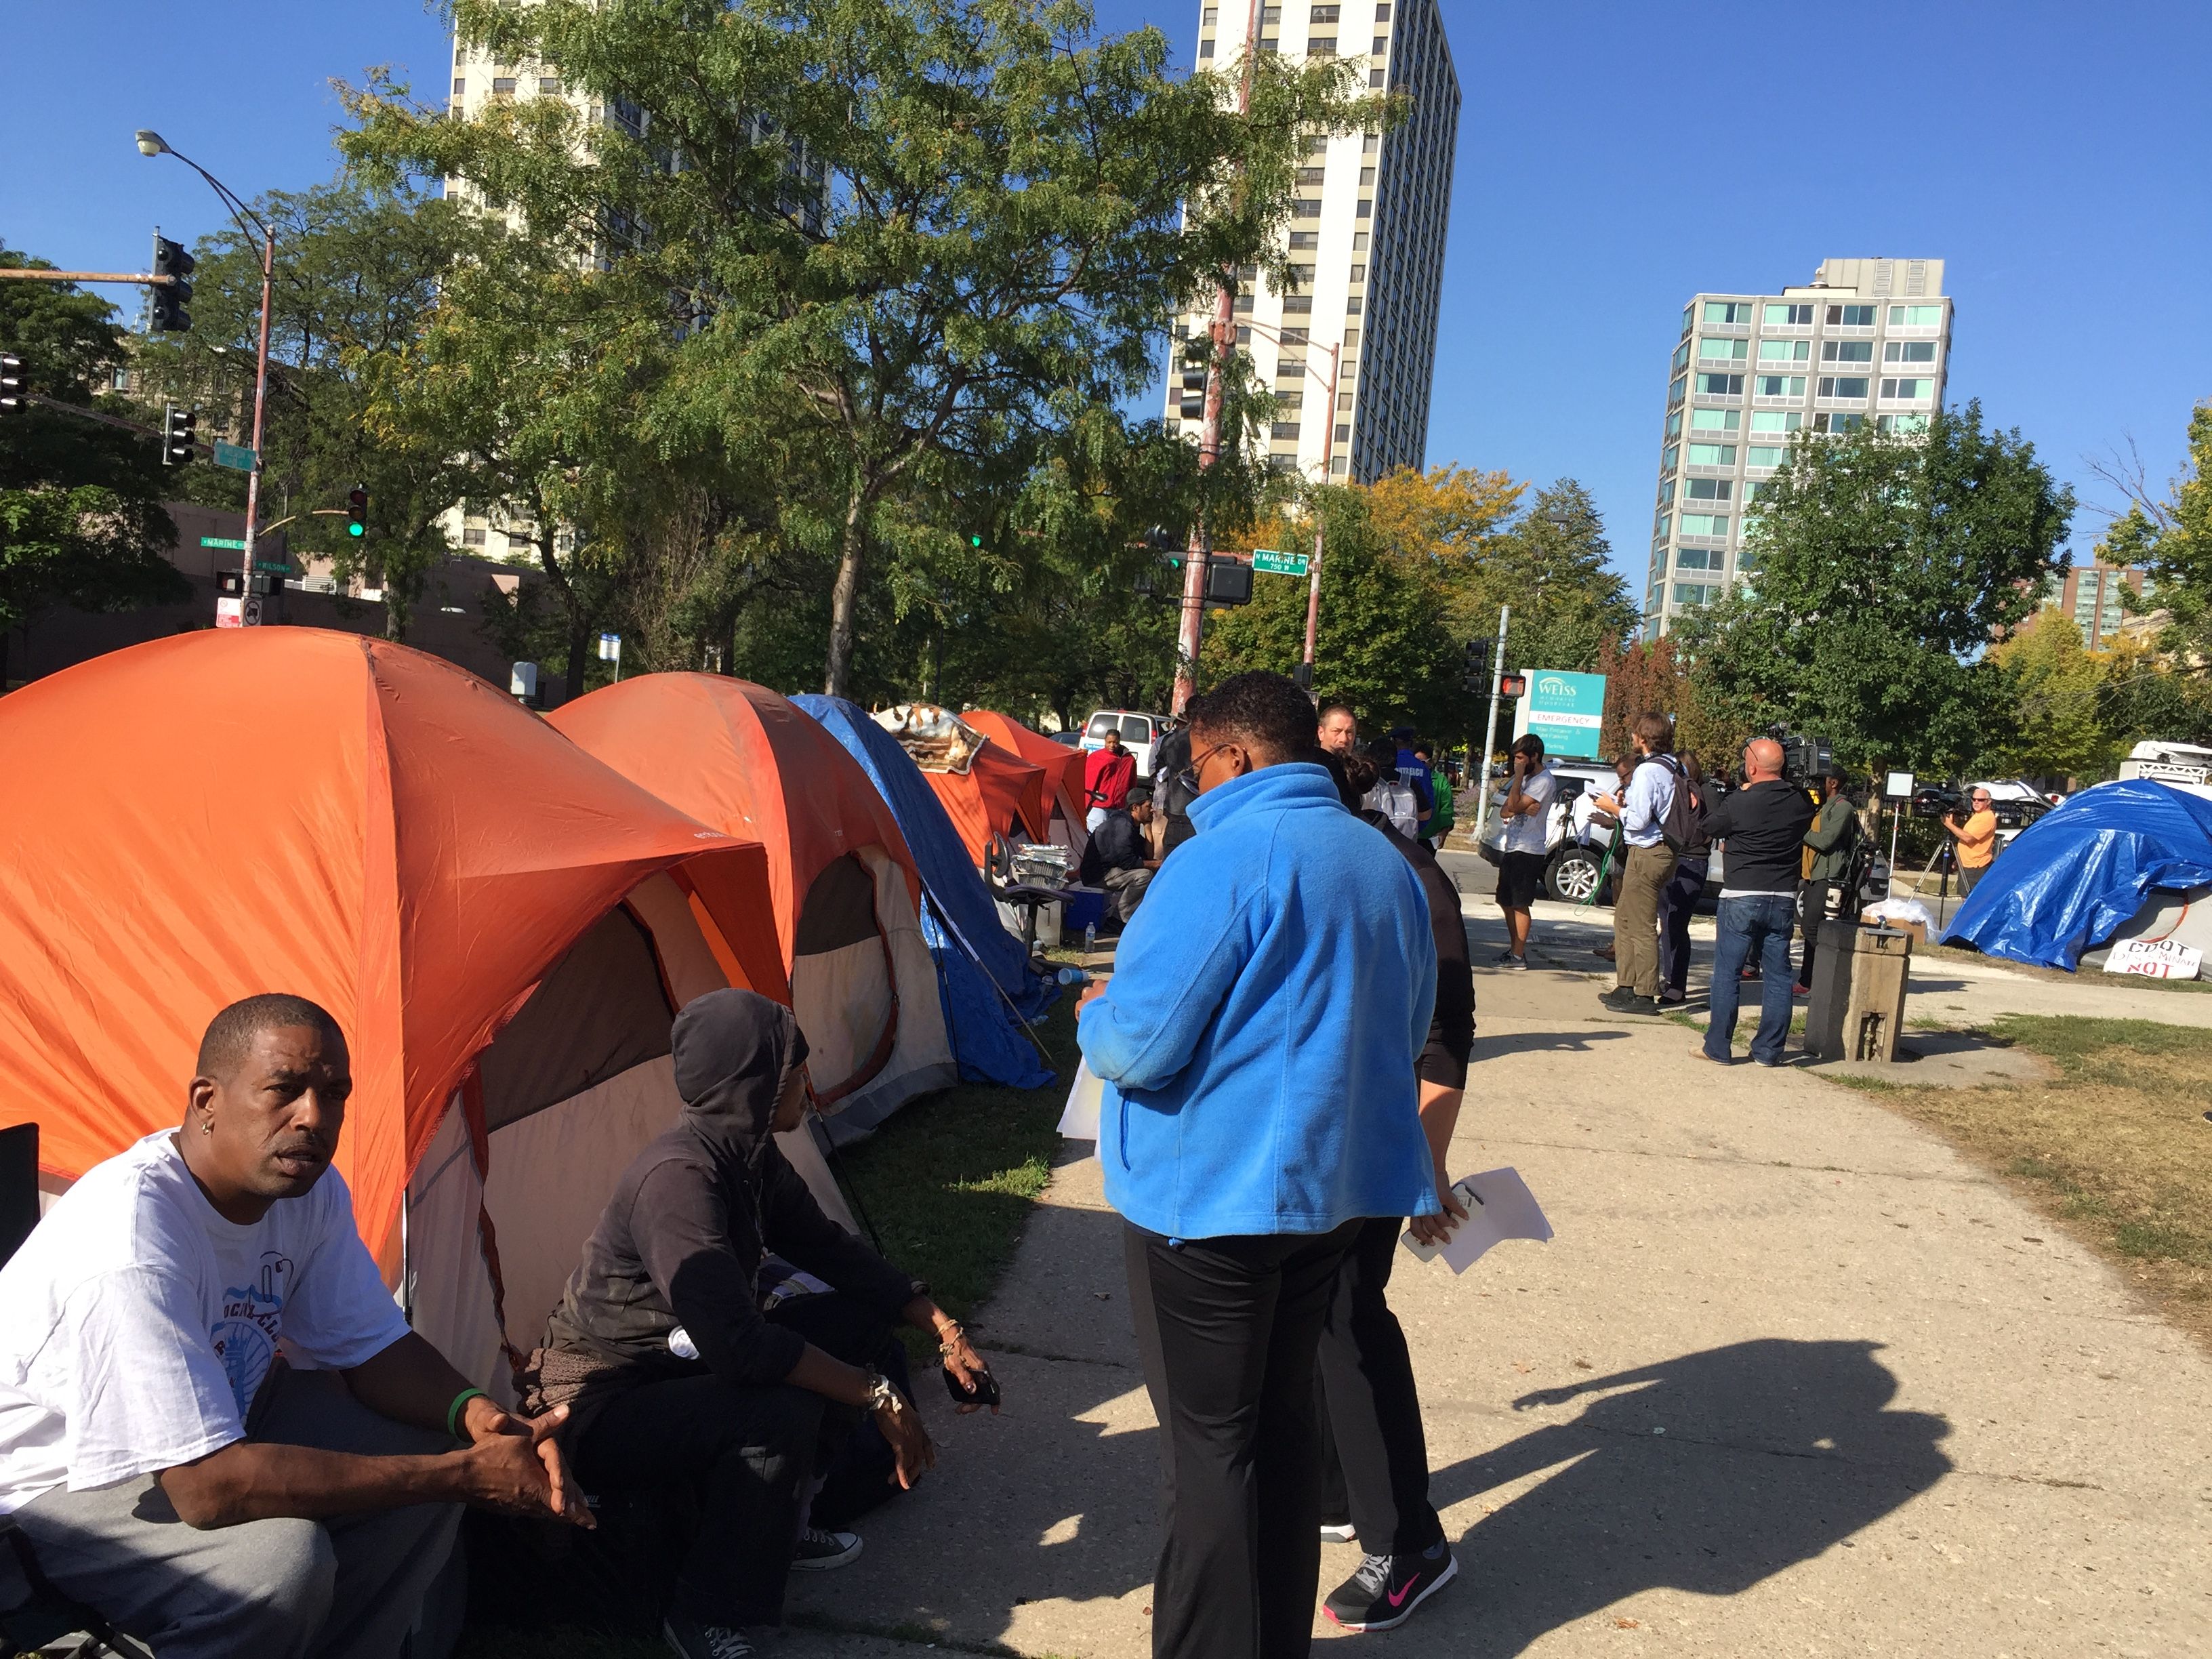 Federal lawsuit blasts Chicago's destruction of homeless tent cities